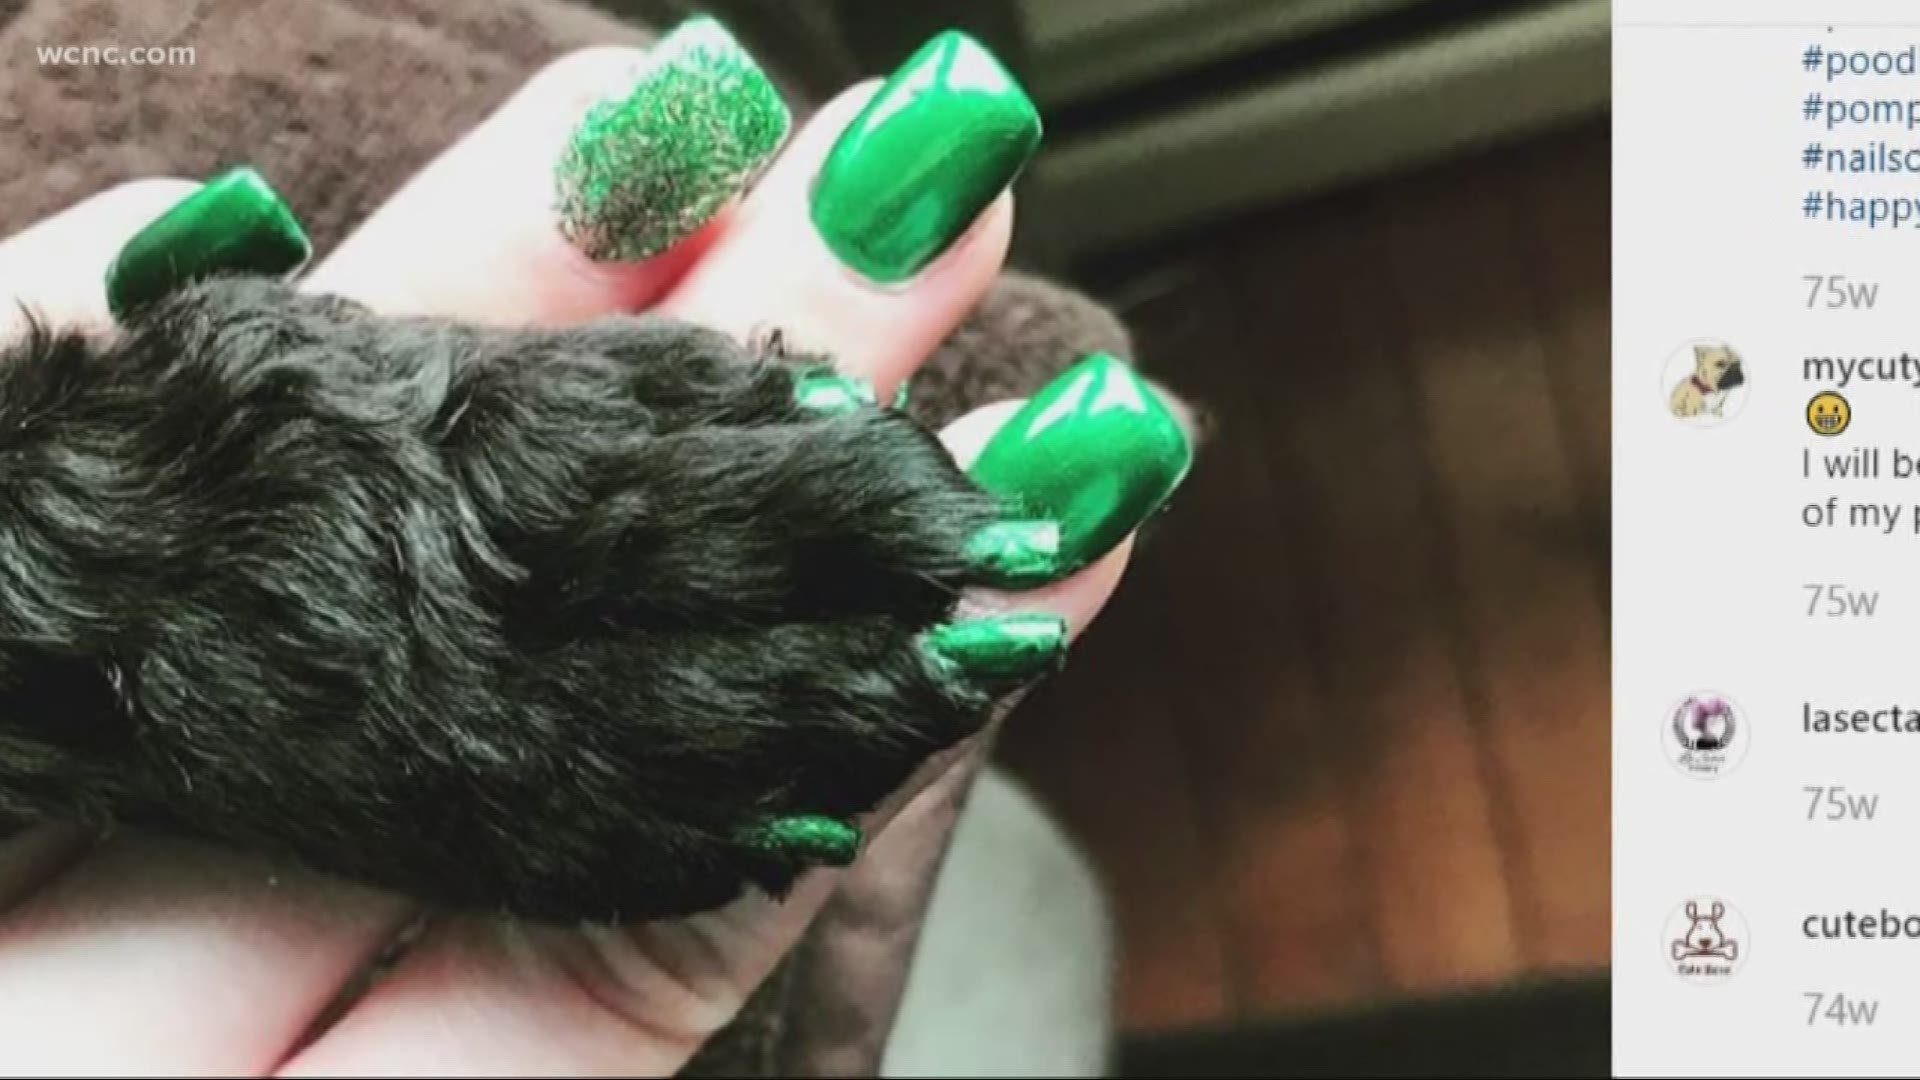 Talk about giving your dog an extra level of pampering. People are using #Pawlish to share photos of their matching pedicures with their pets.